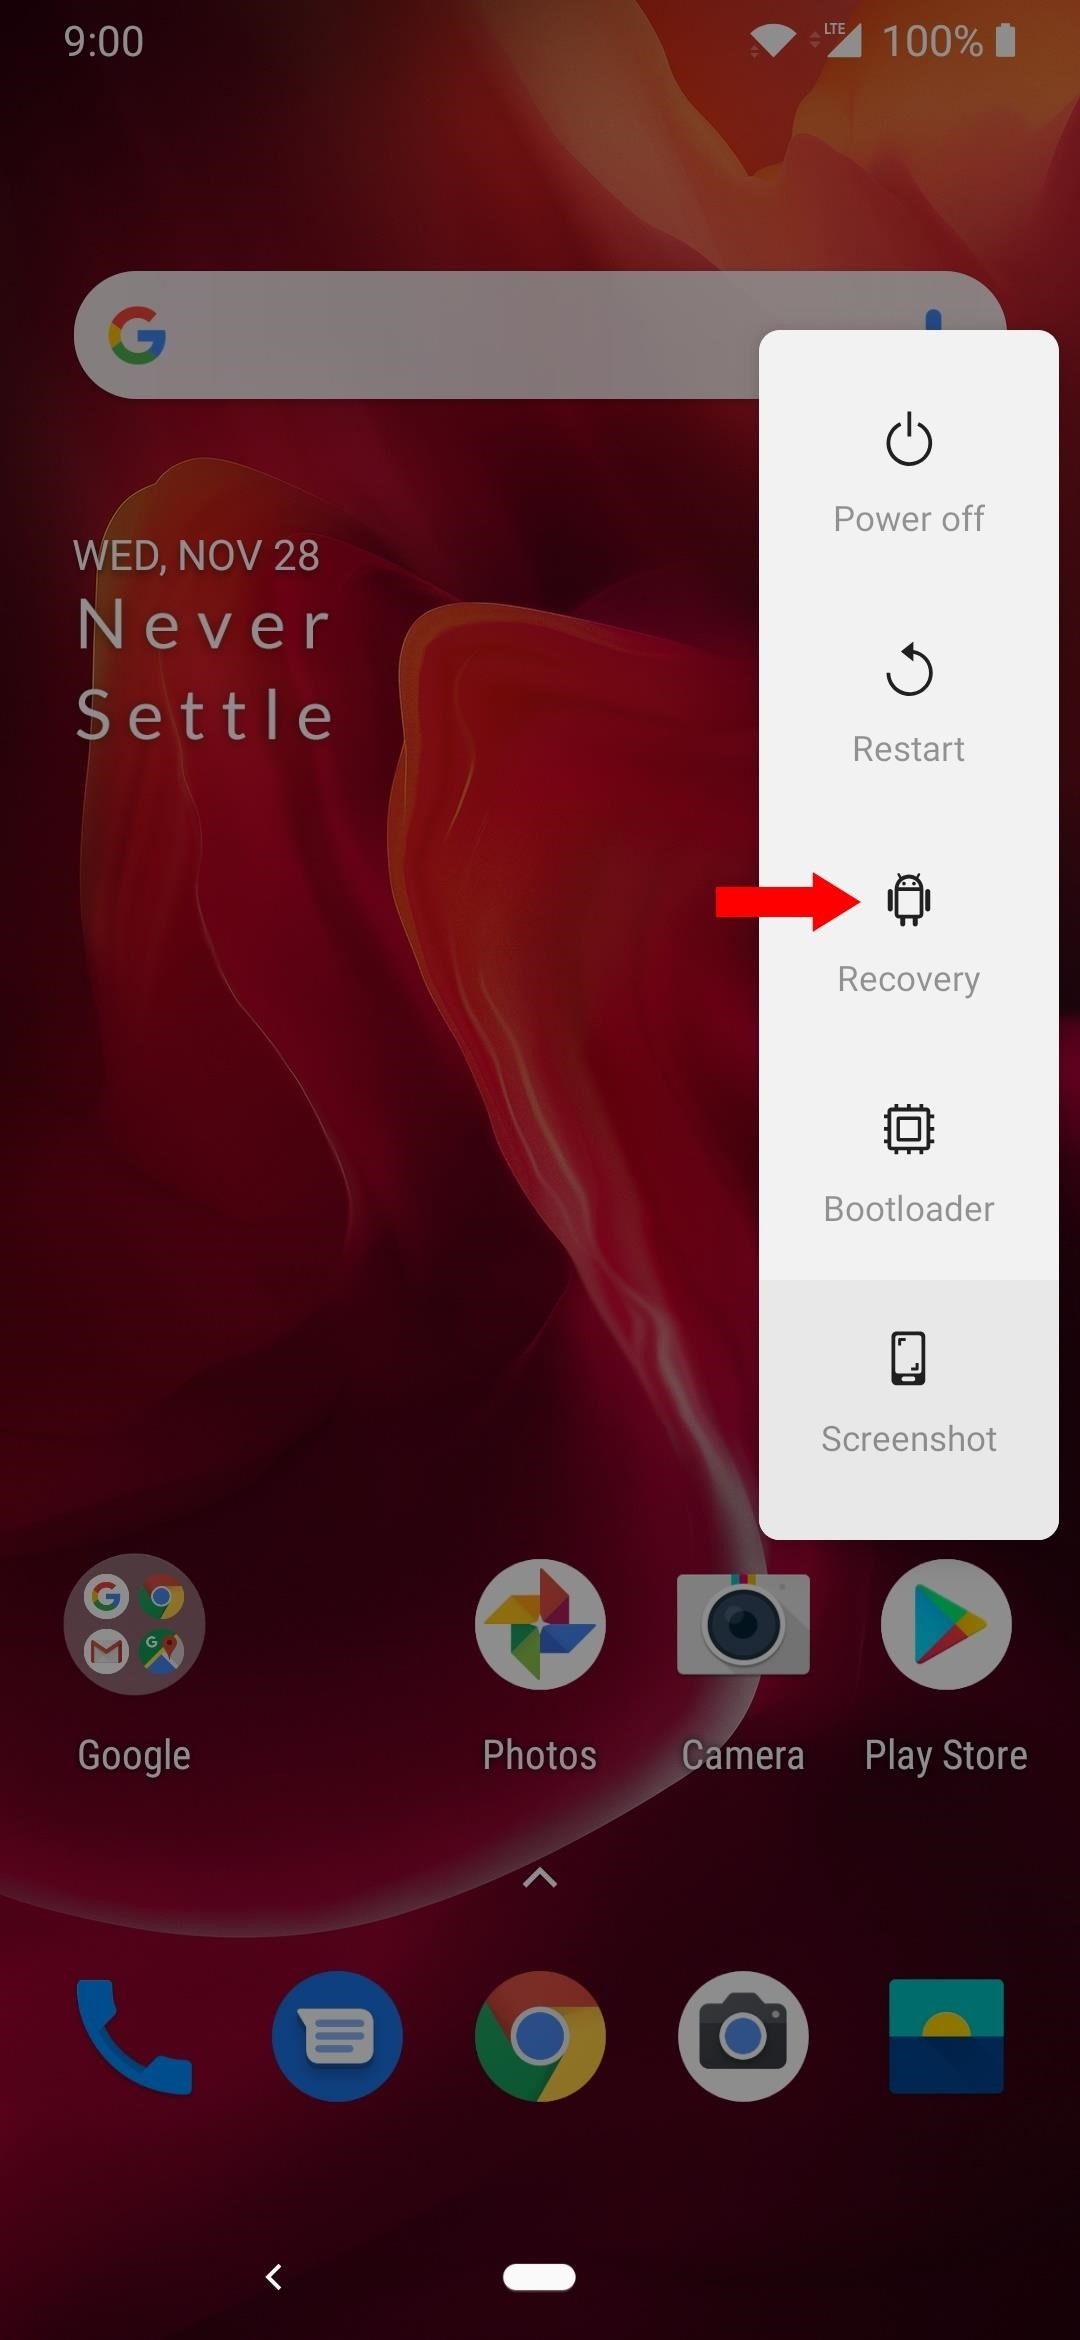 How to Turn Your OnePlus 6T into a Google Pixel